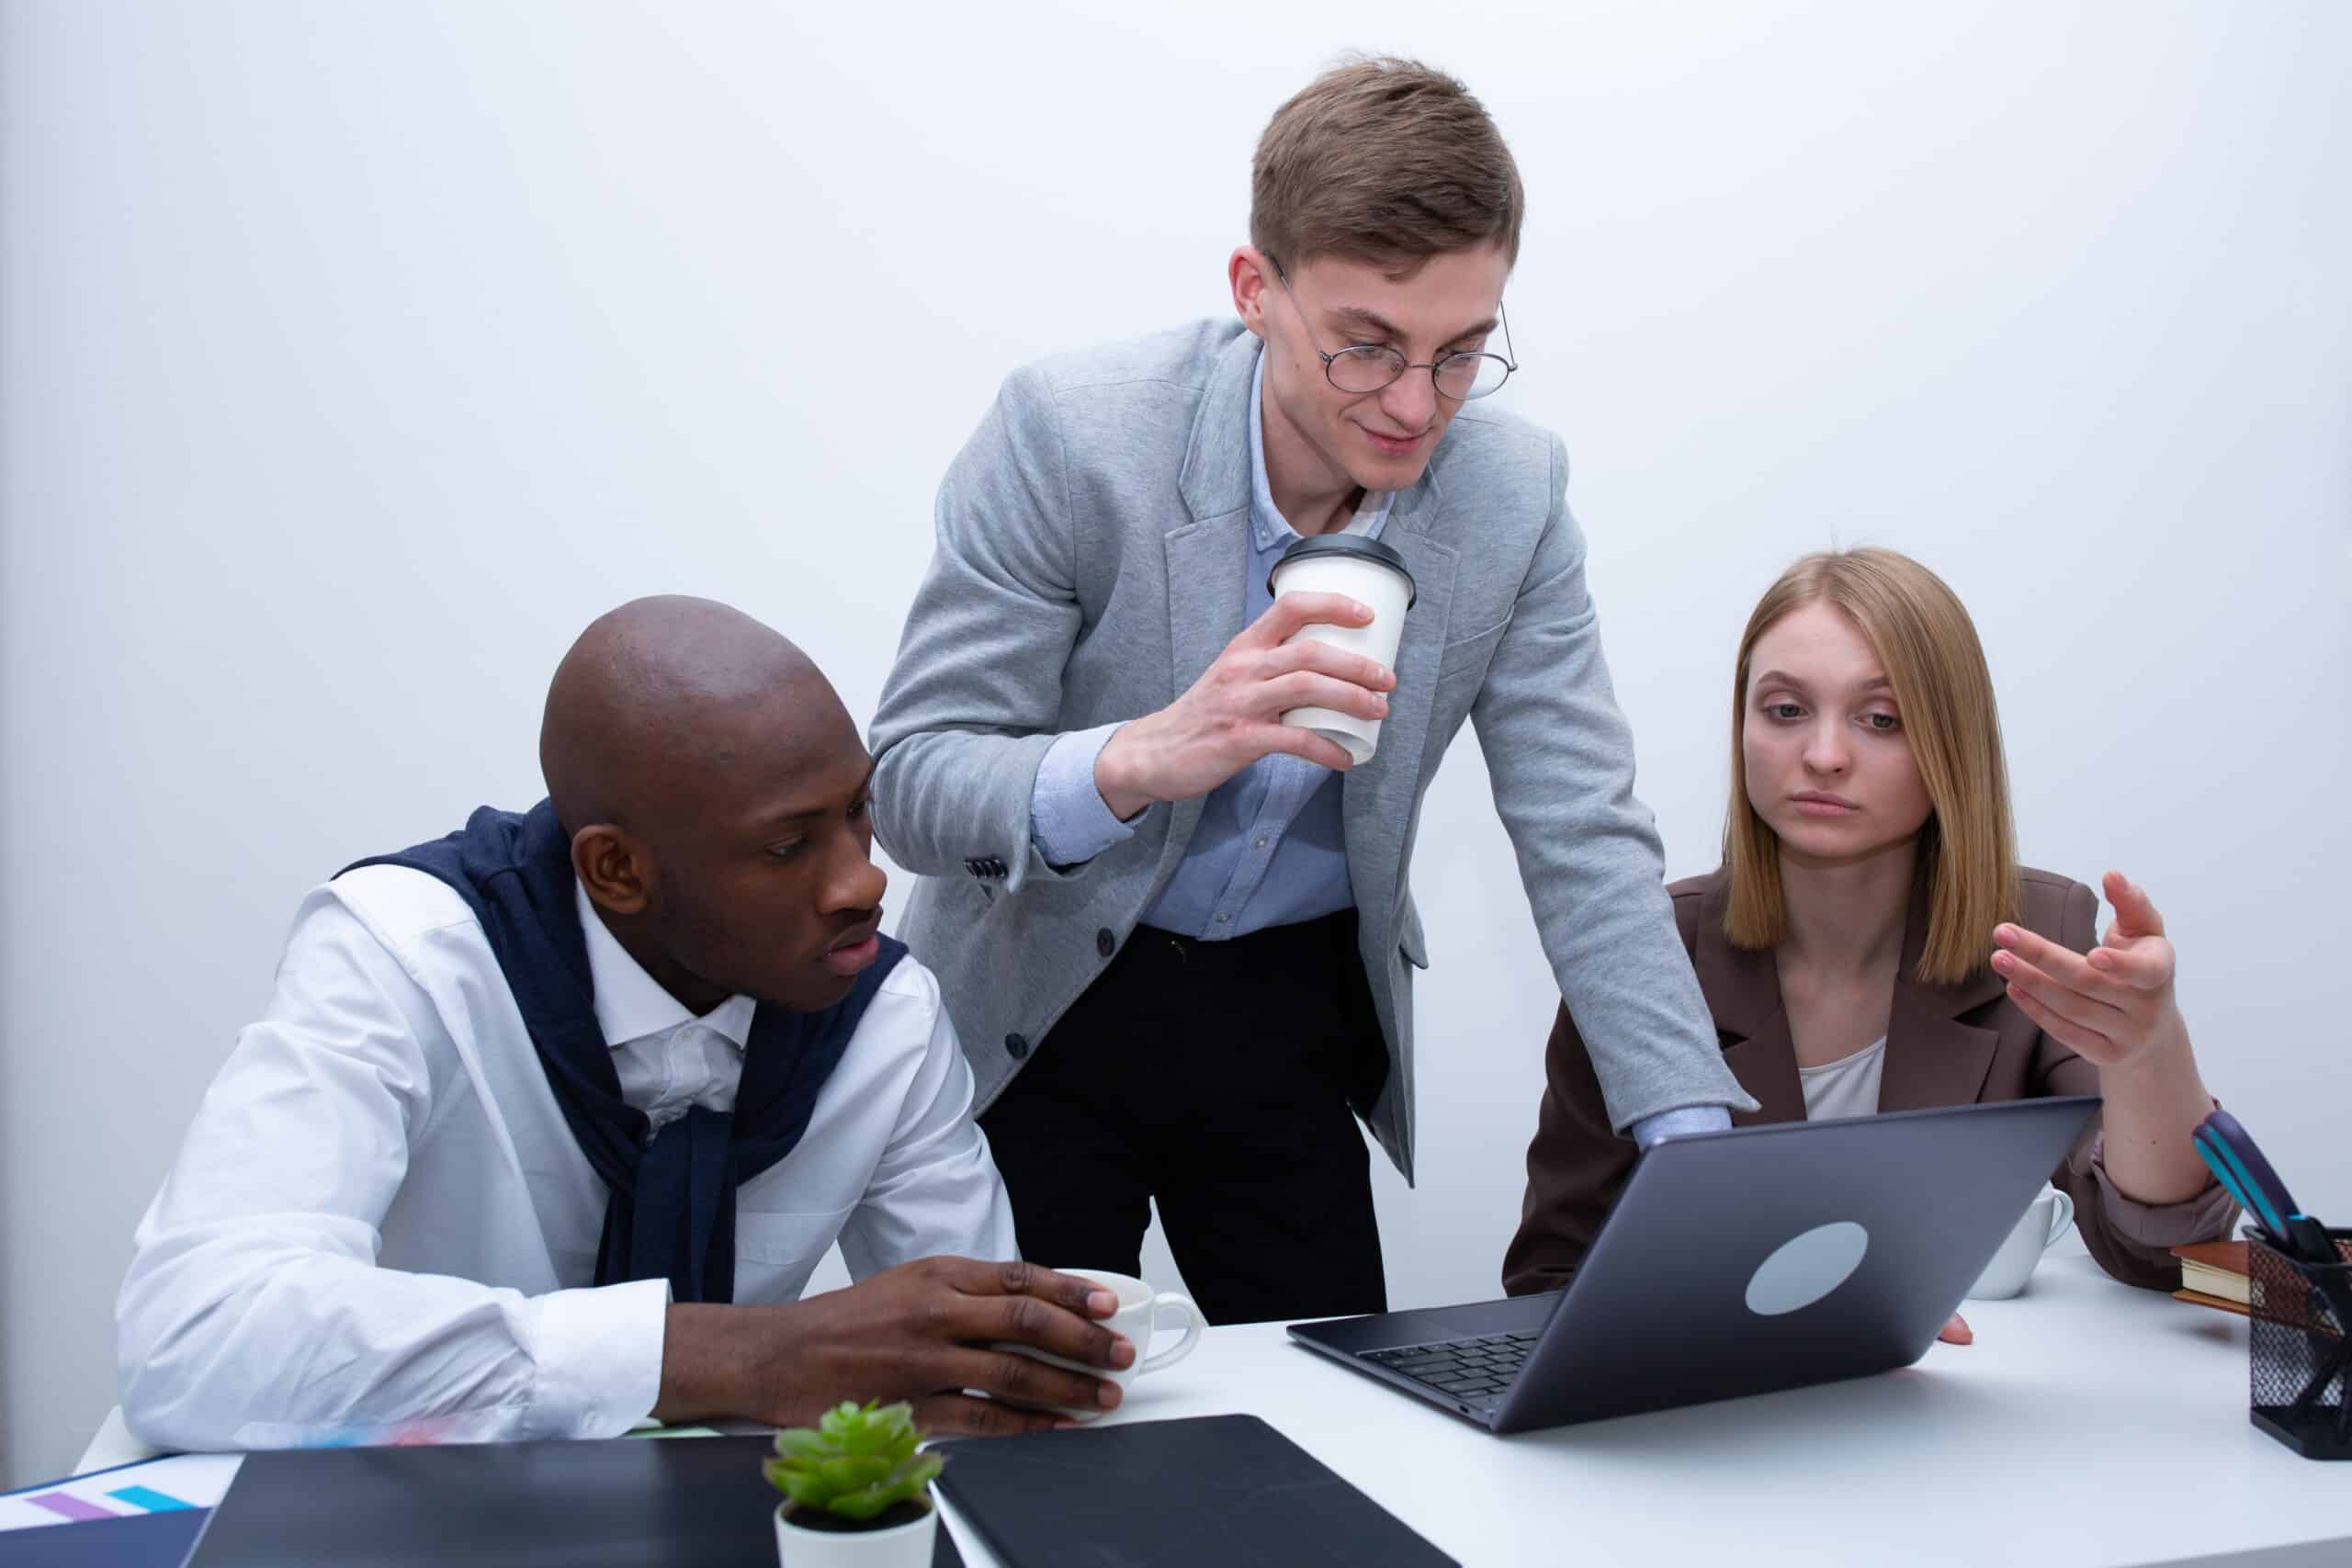 Three business people looking at a laptop in an office.